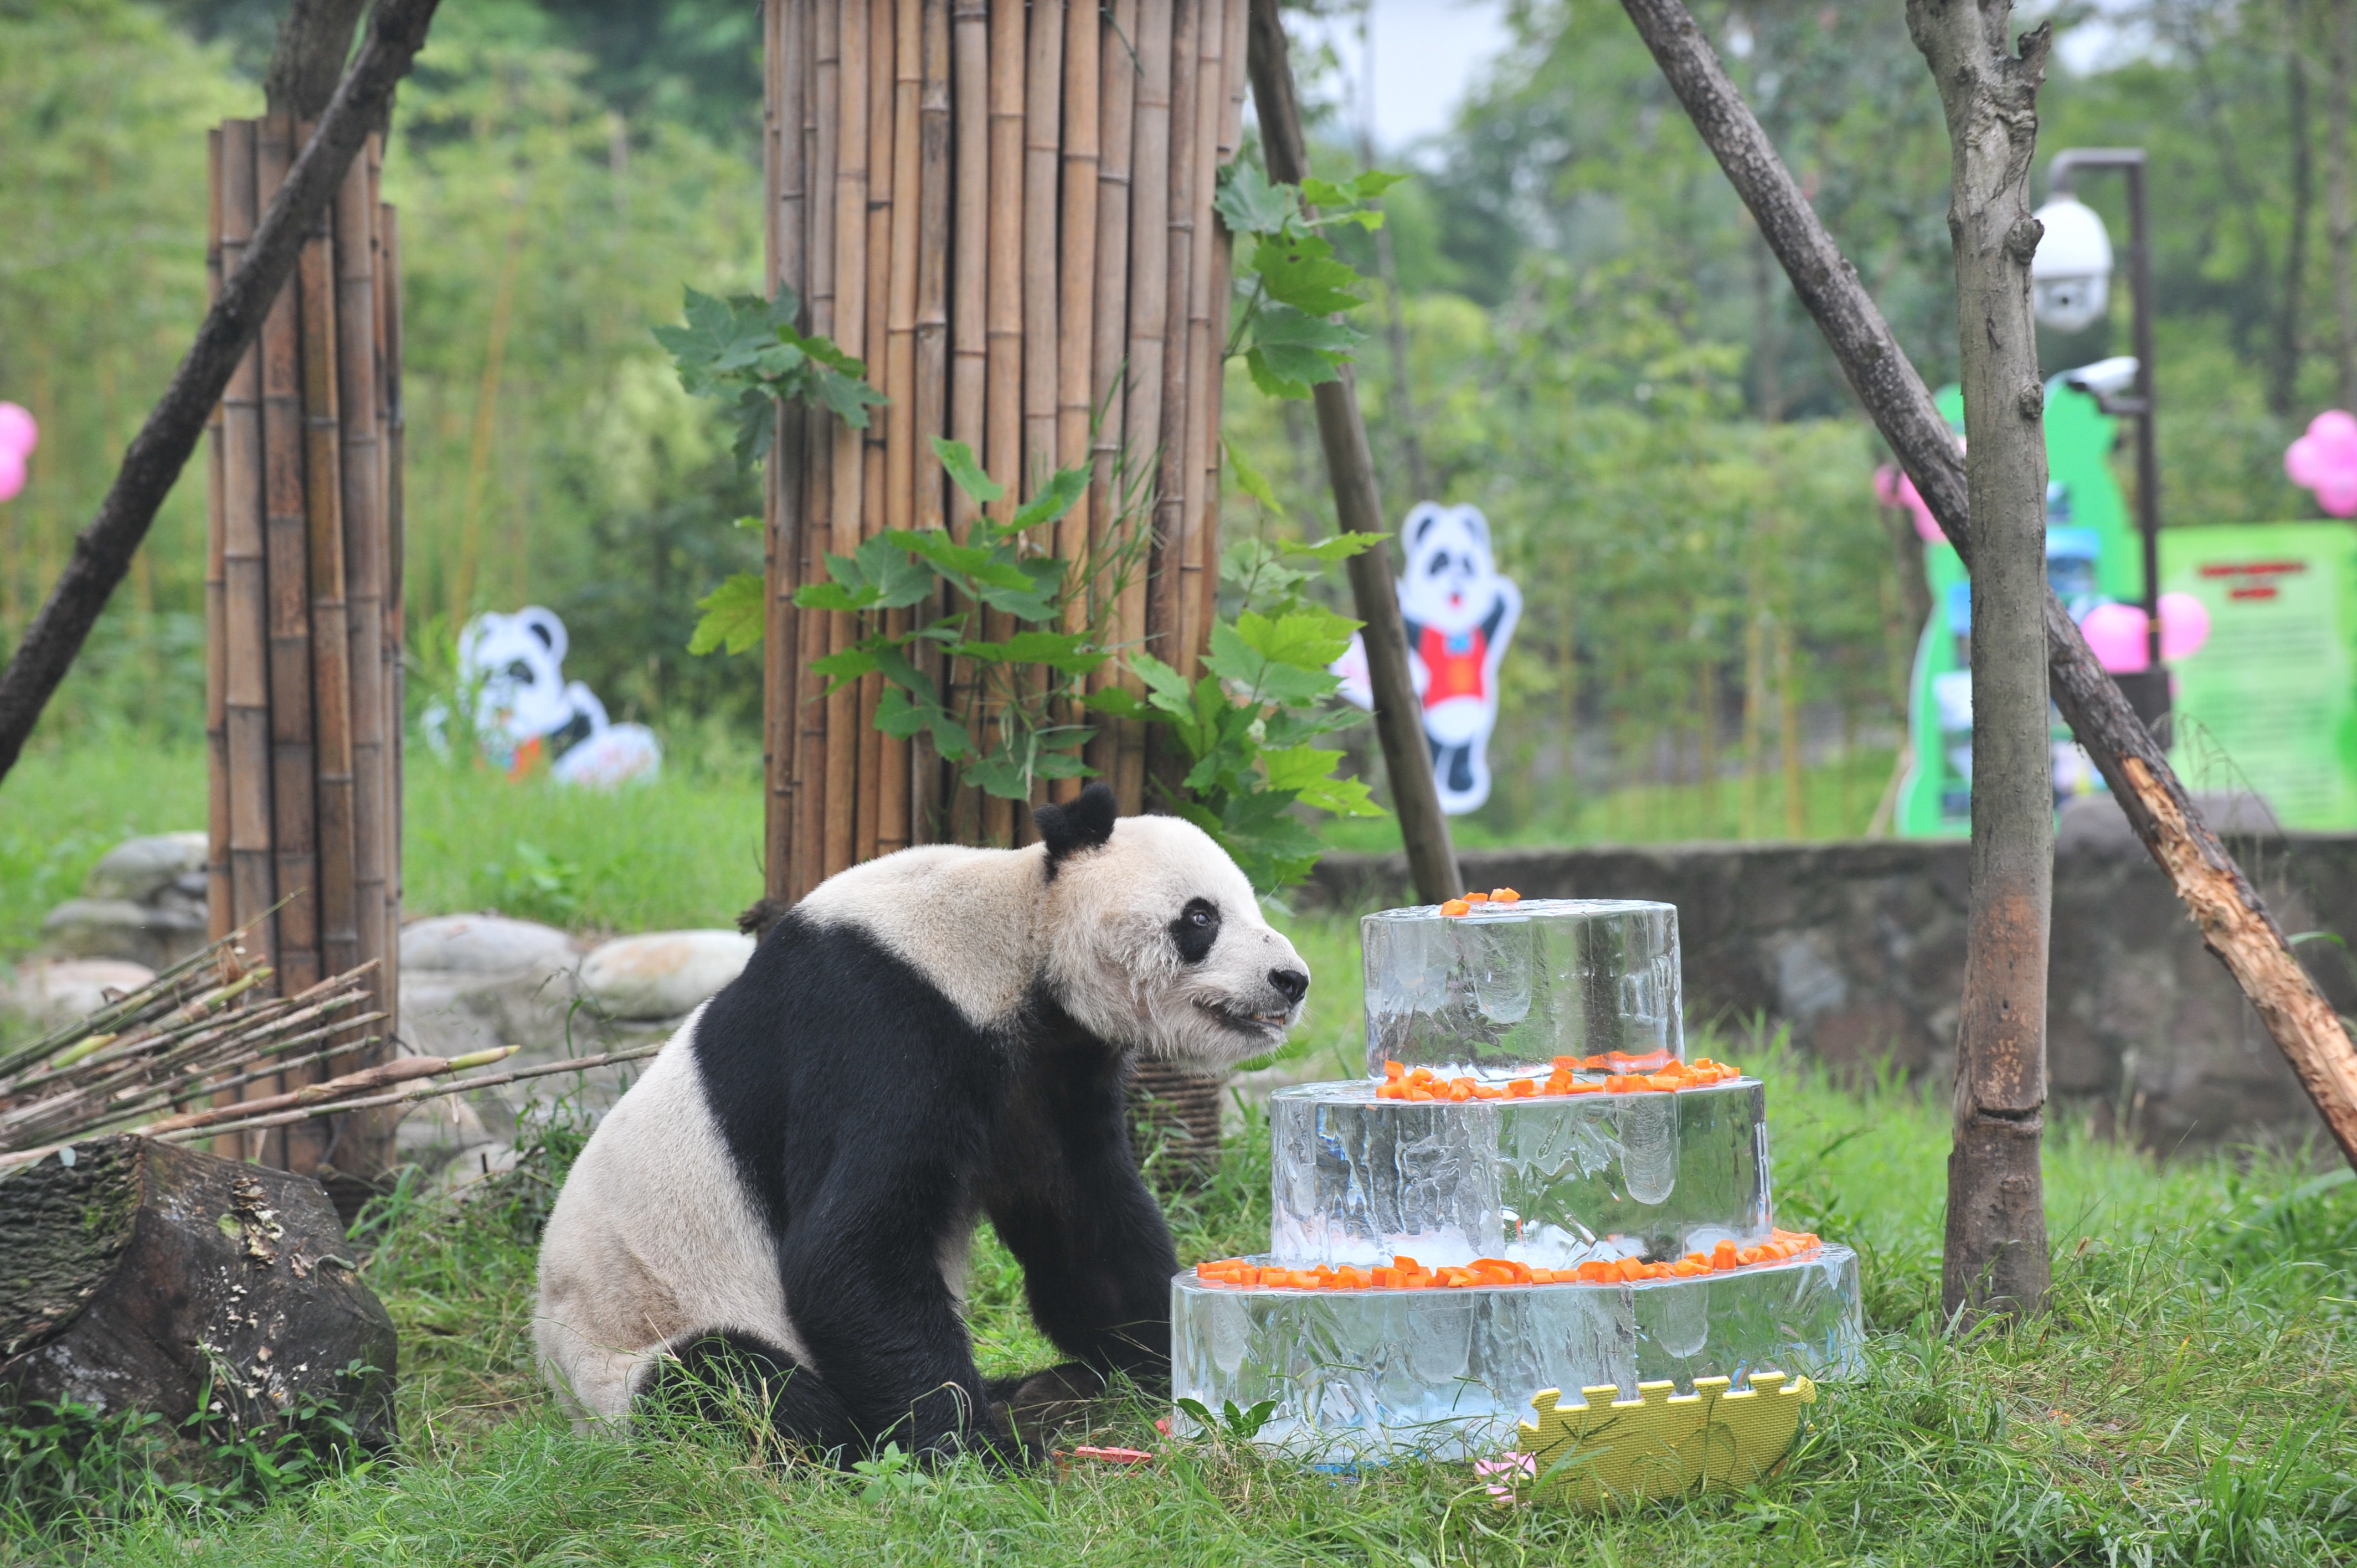 Giant panda Pan Pan sits near a frozen cake during its 30th birthday celebration at the China Conservation and Research Center for the Giant Panda in Dujiangyan, China, Sept. 21, 2015. (VCG—VCG via Getty Images)